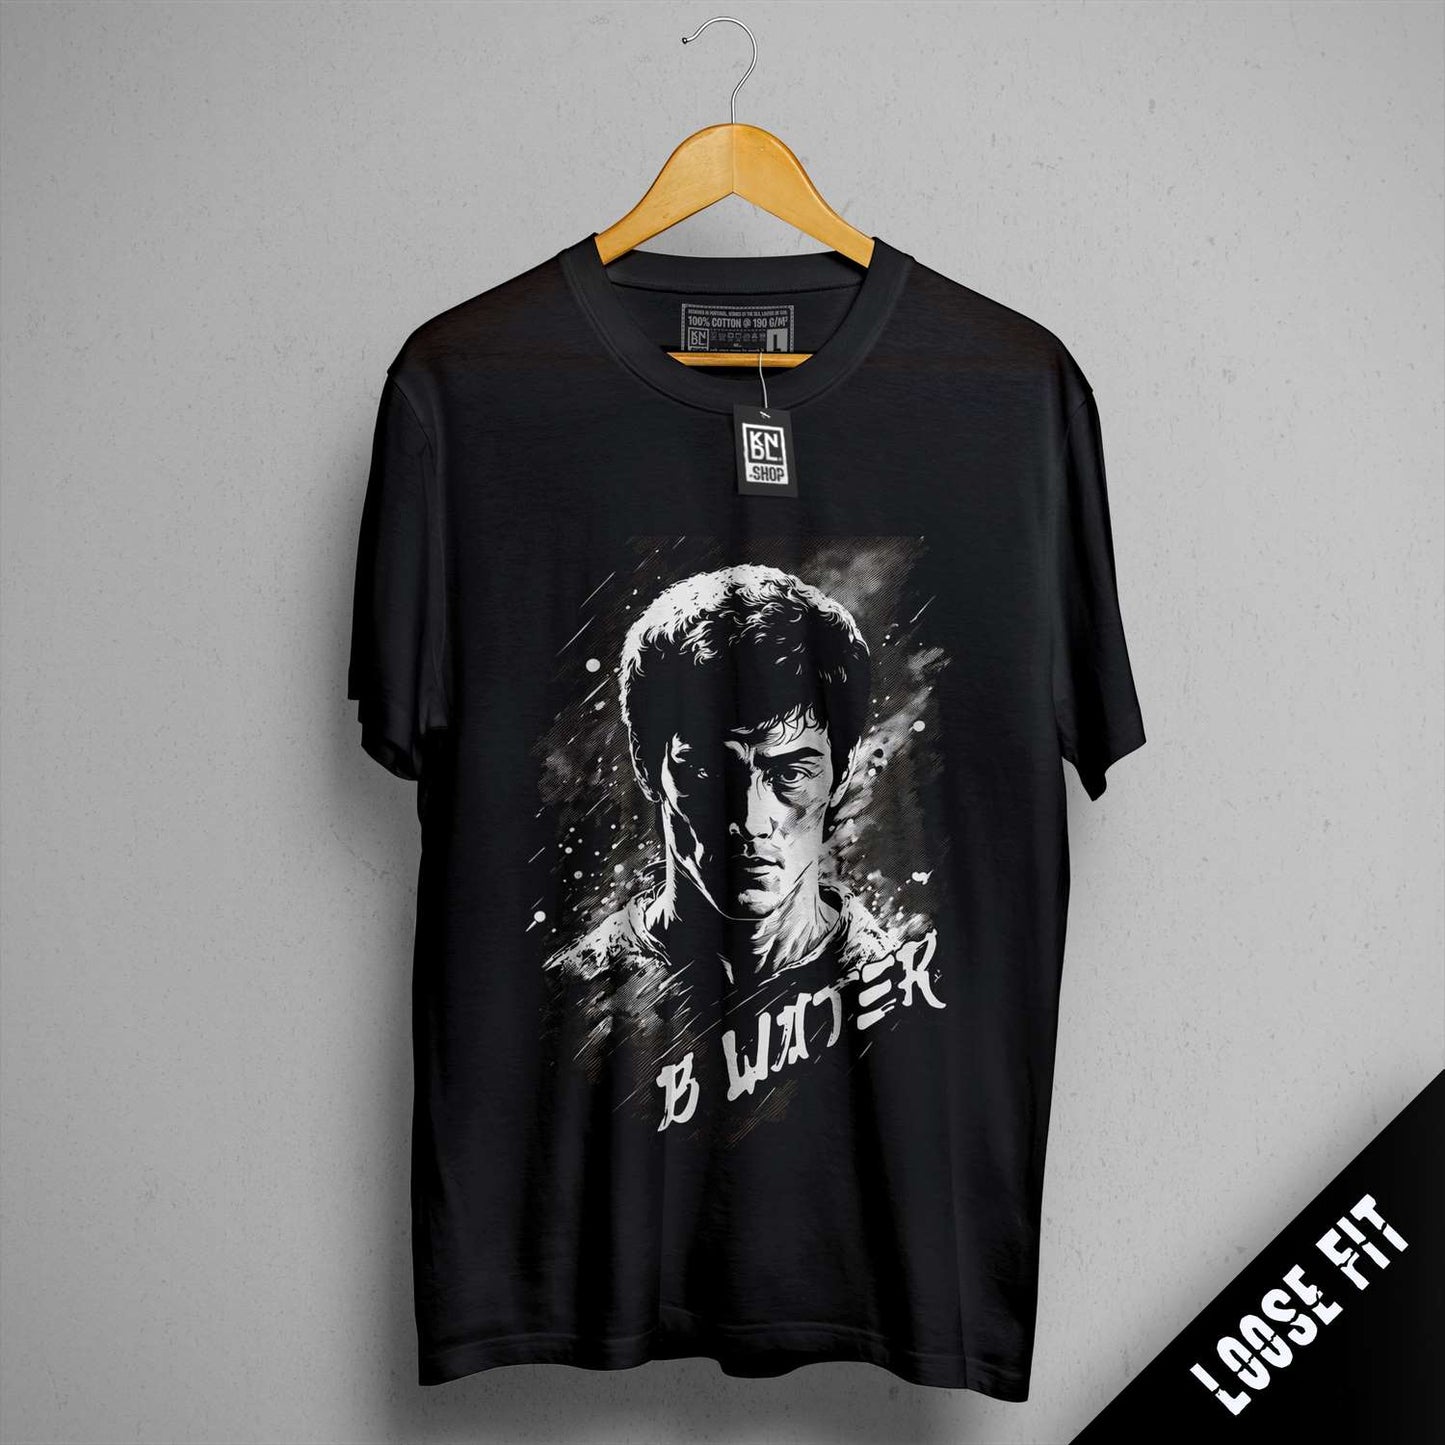 a black t - shirt with a picture of a man holding a gun